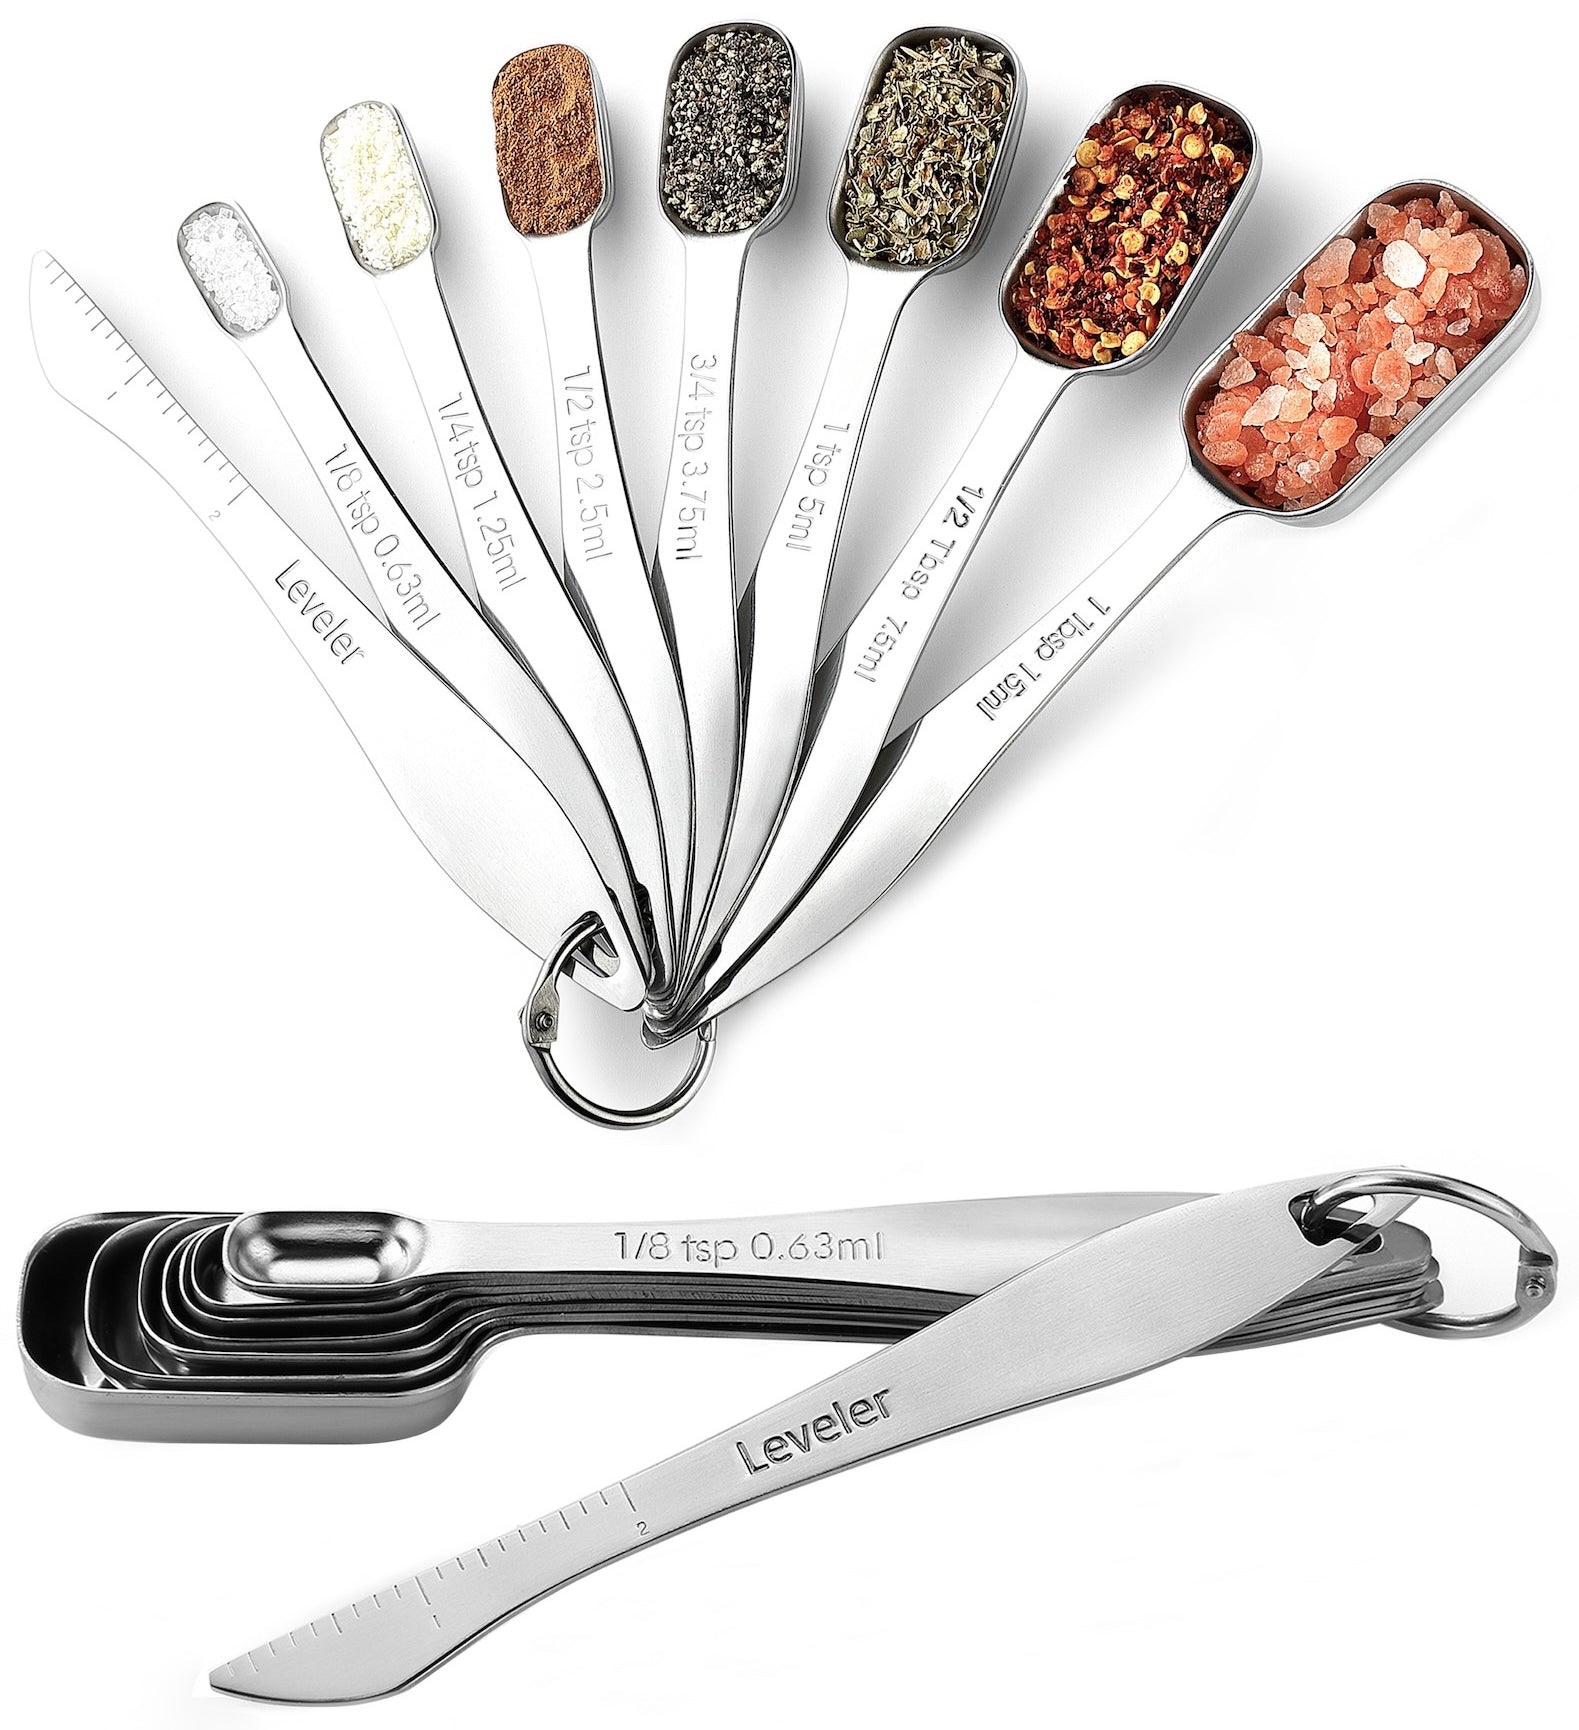 Stainless Steel Measuring Spoons Set for Dry or Liquid - Fits in